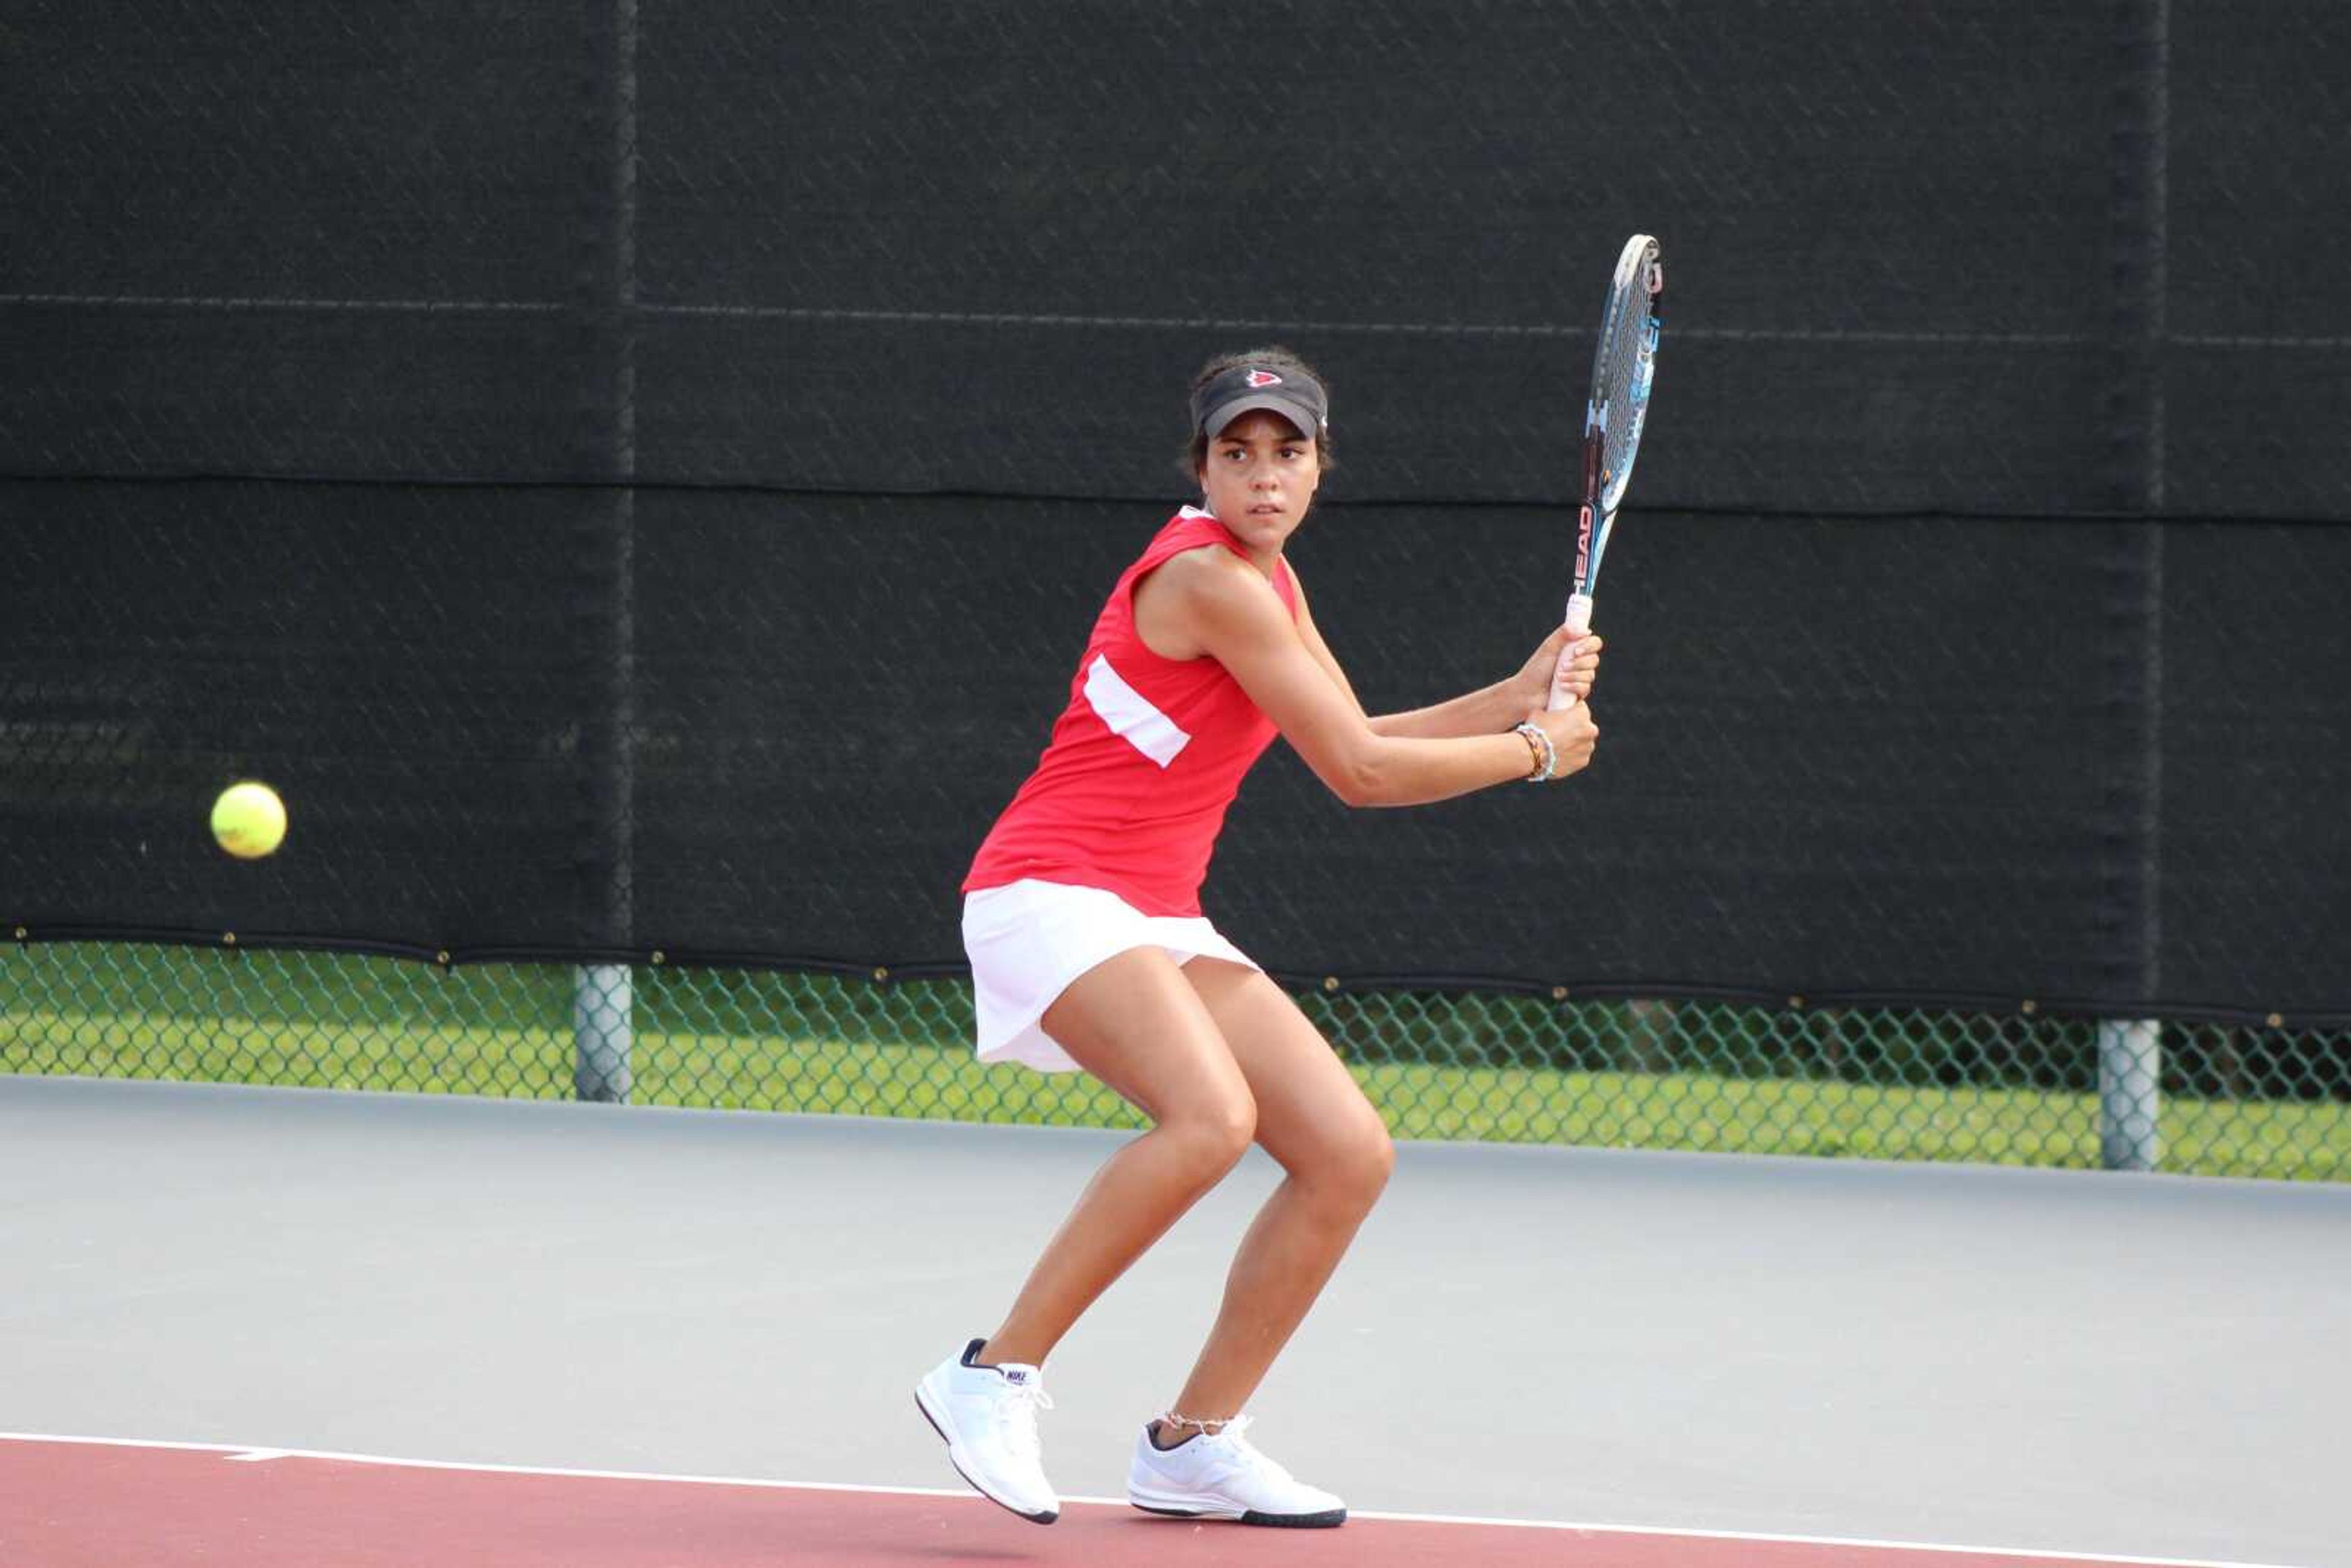 Sophomore Ana Canahuate-Torres prepares to swing on Saturday, Sept. 10, while competing at Tennessee-Martin. Submitted photo